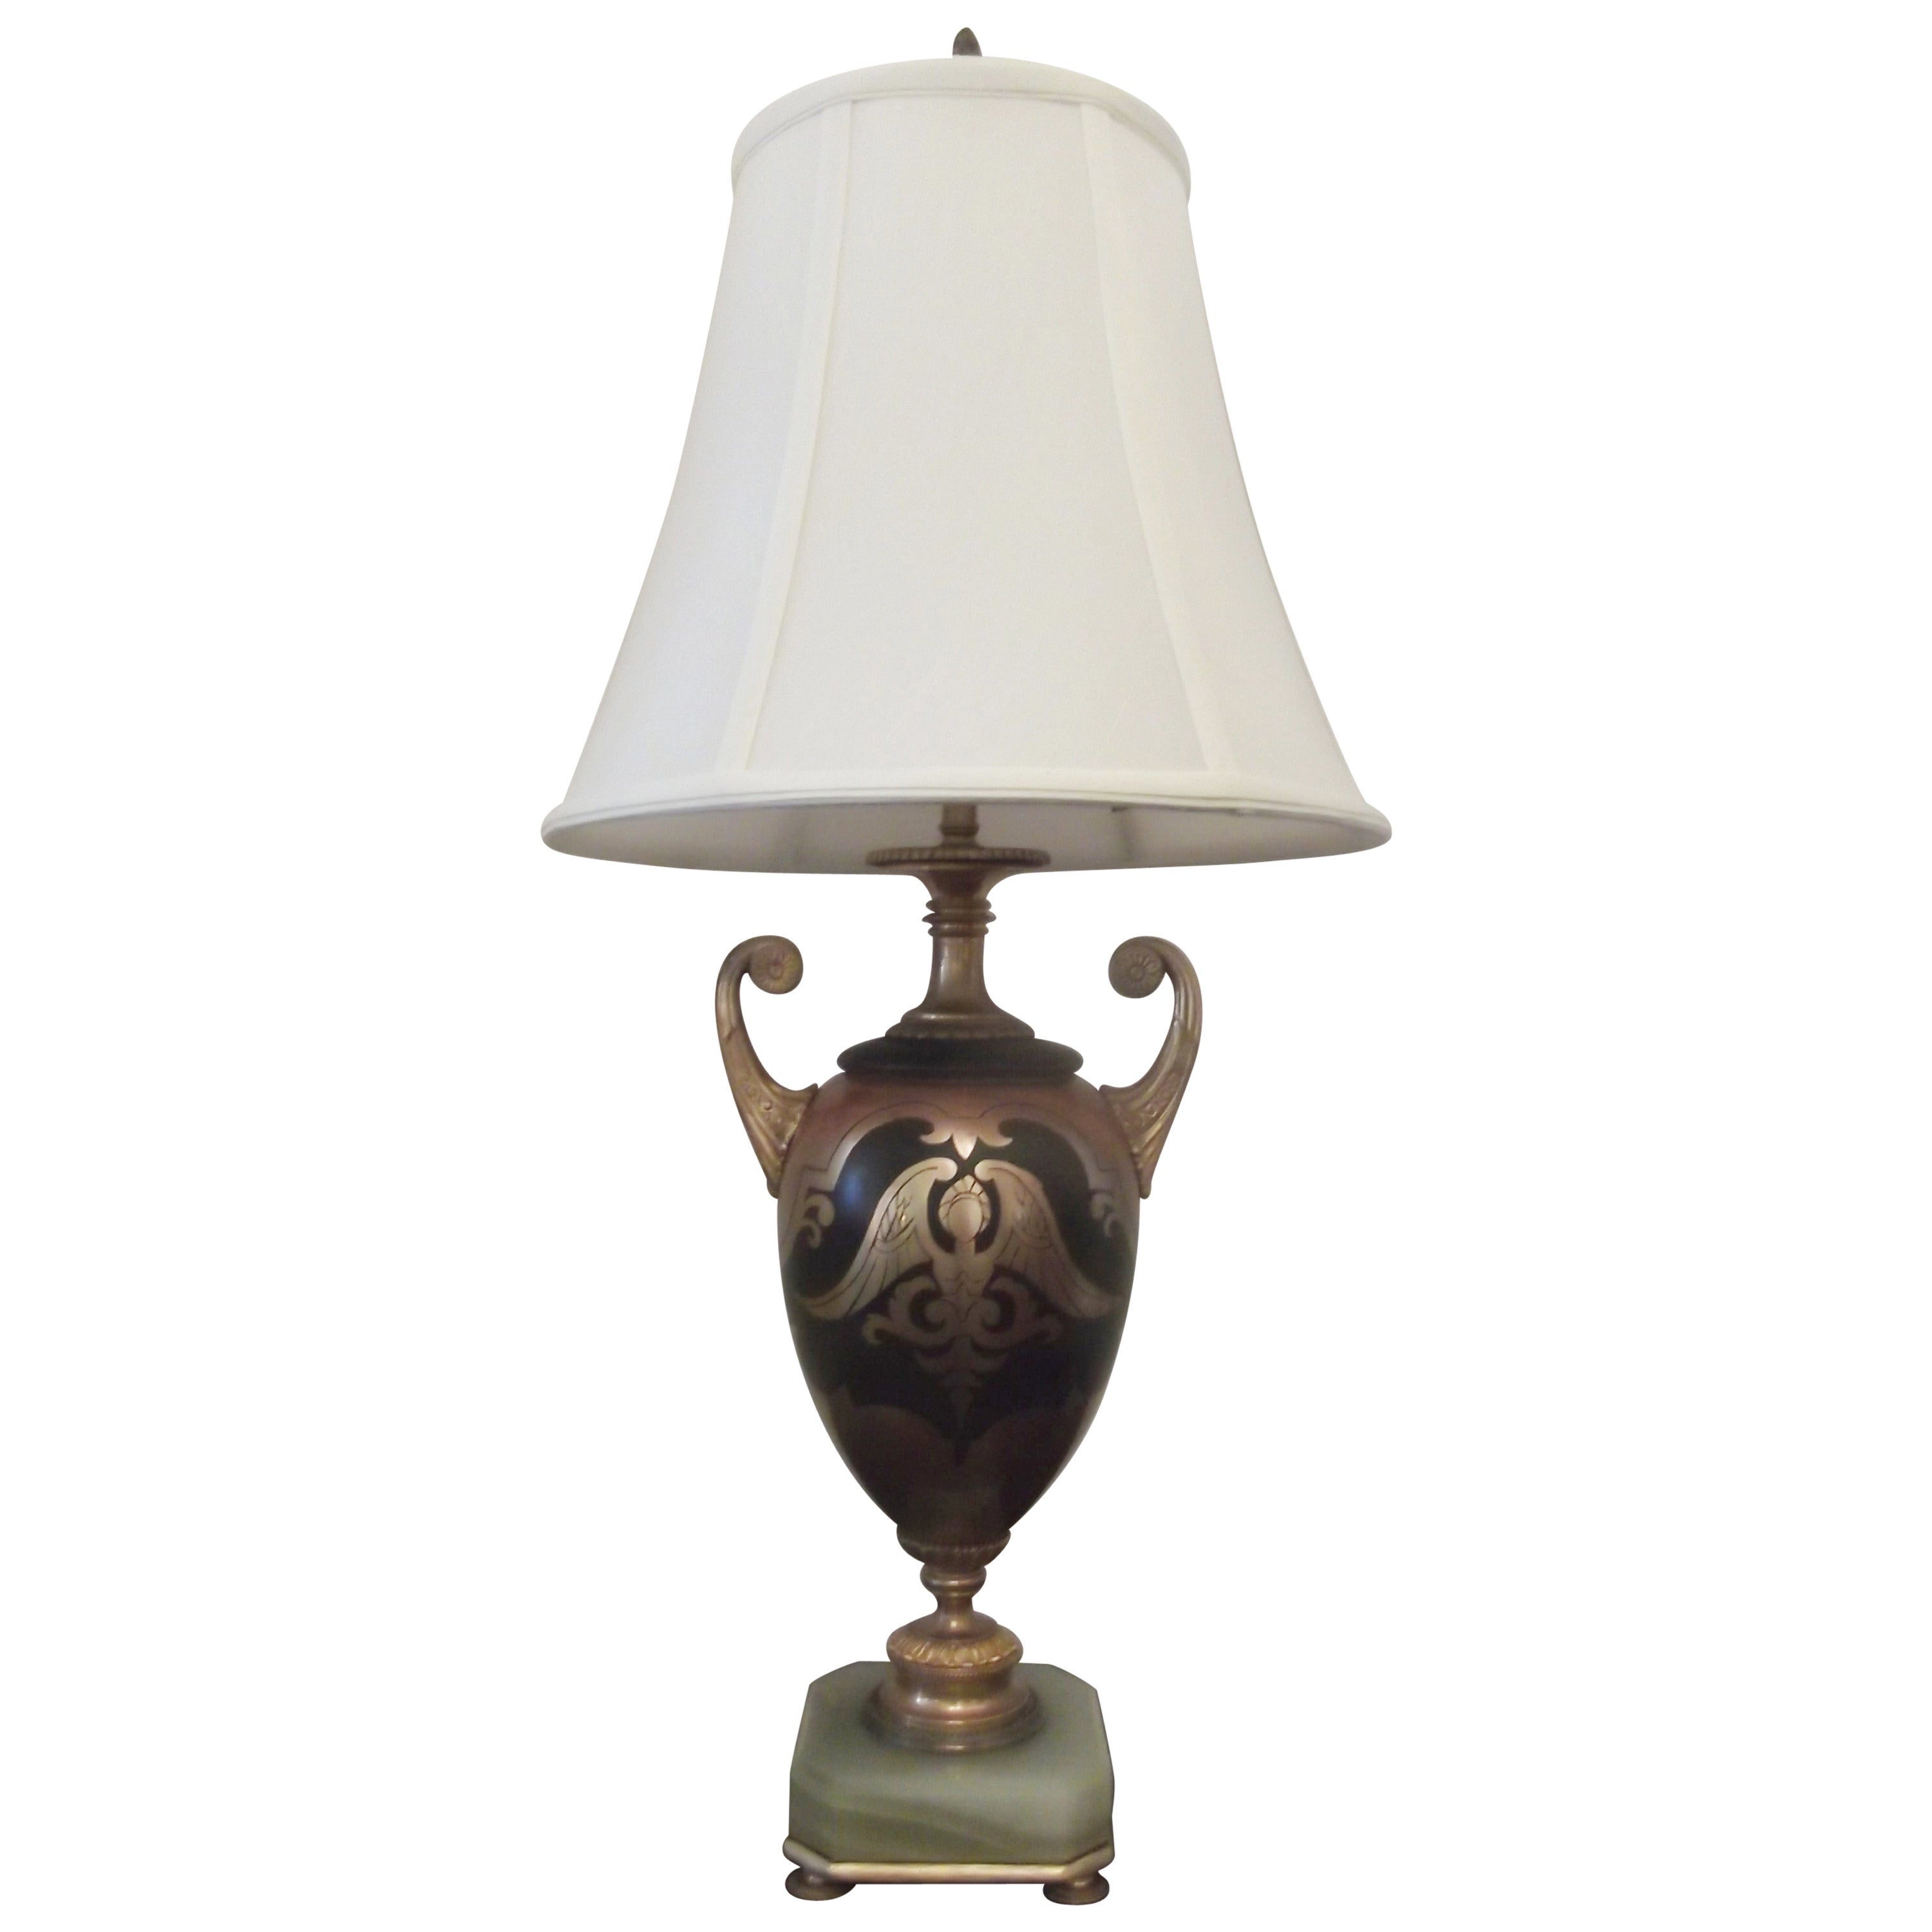 Antique Urn Table Lamp with Onyx Base